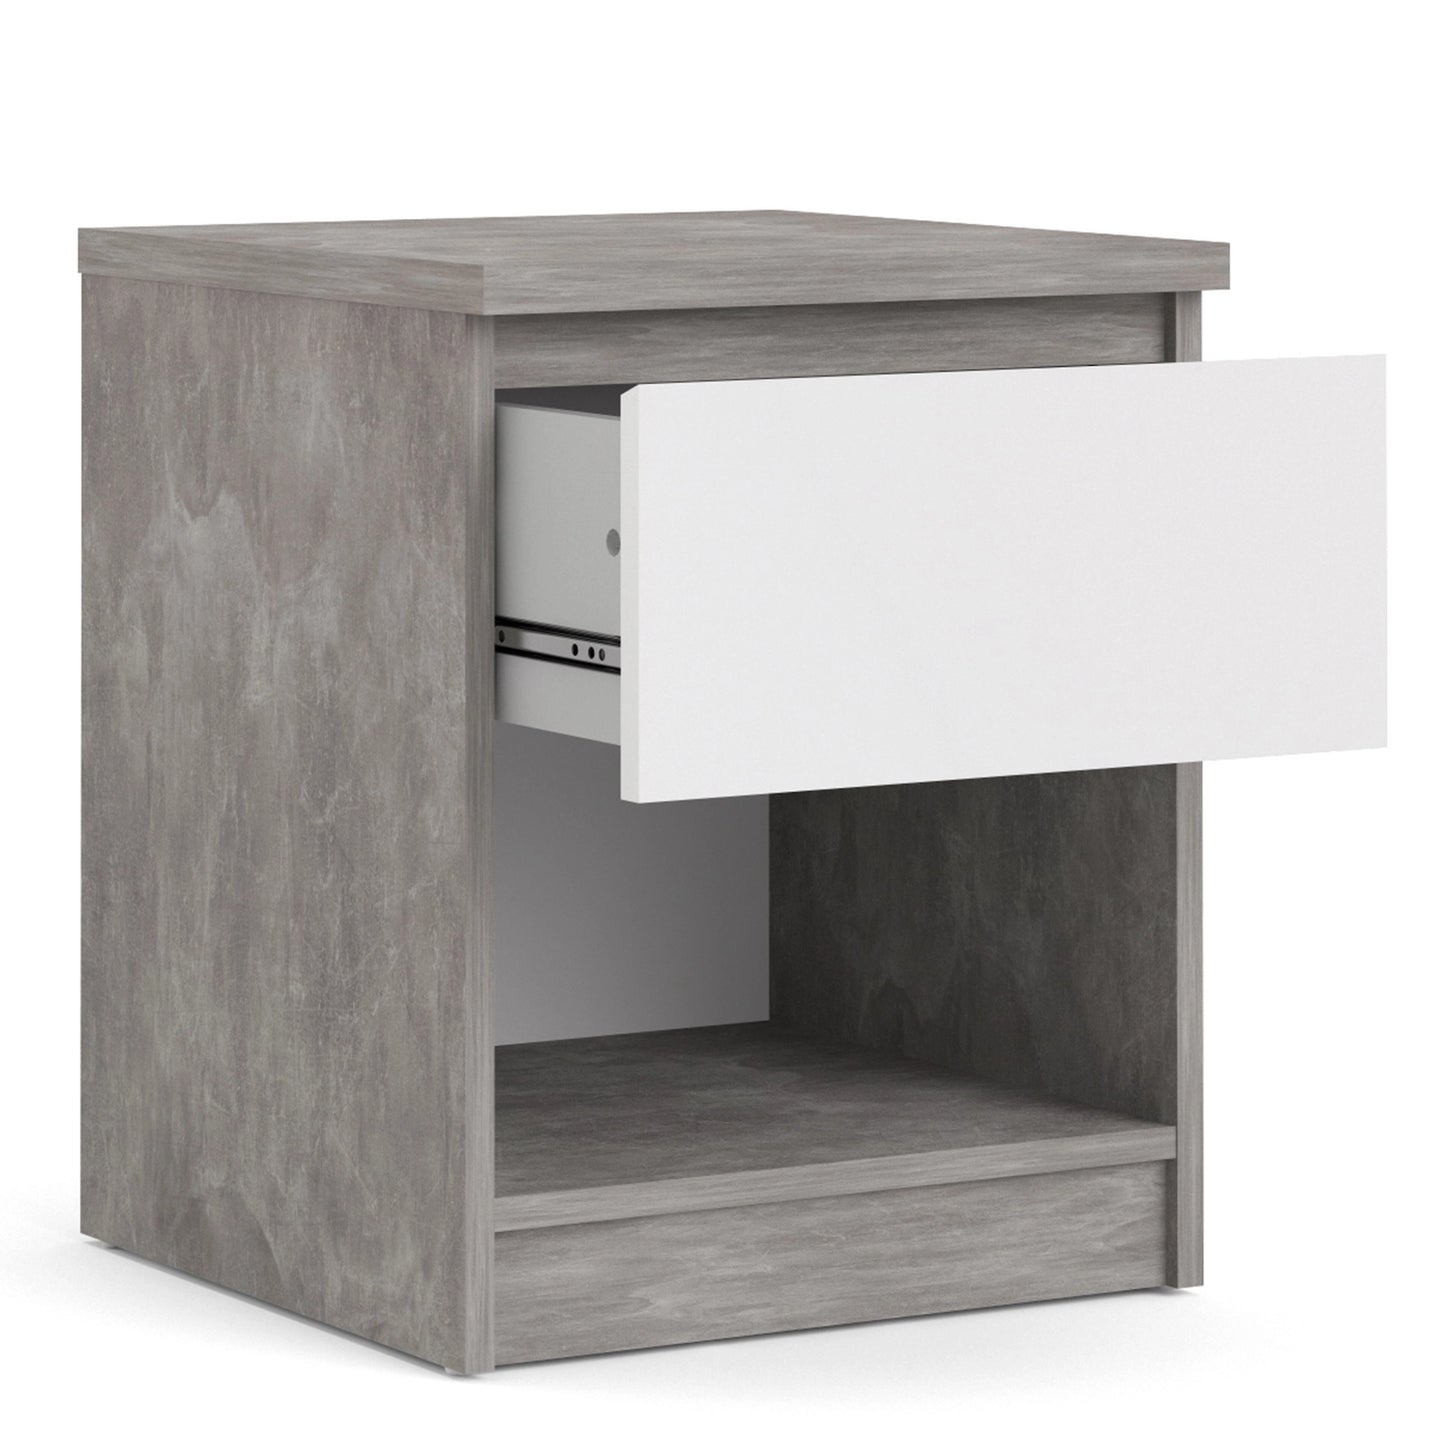 Furniture To Go Naia Bedside 1 Drawer 1 Shelf in Concrete & White High Gloss